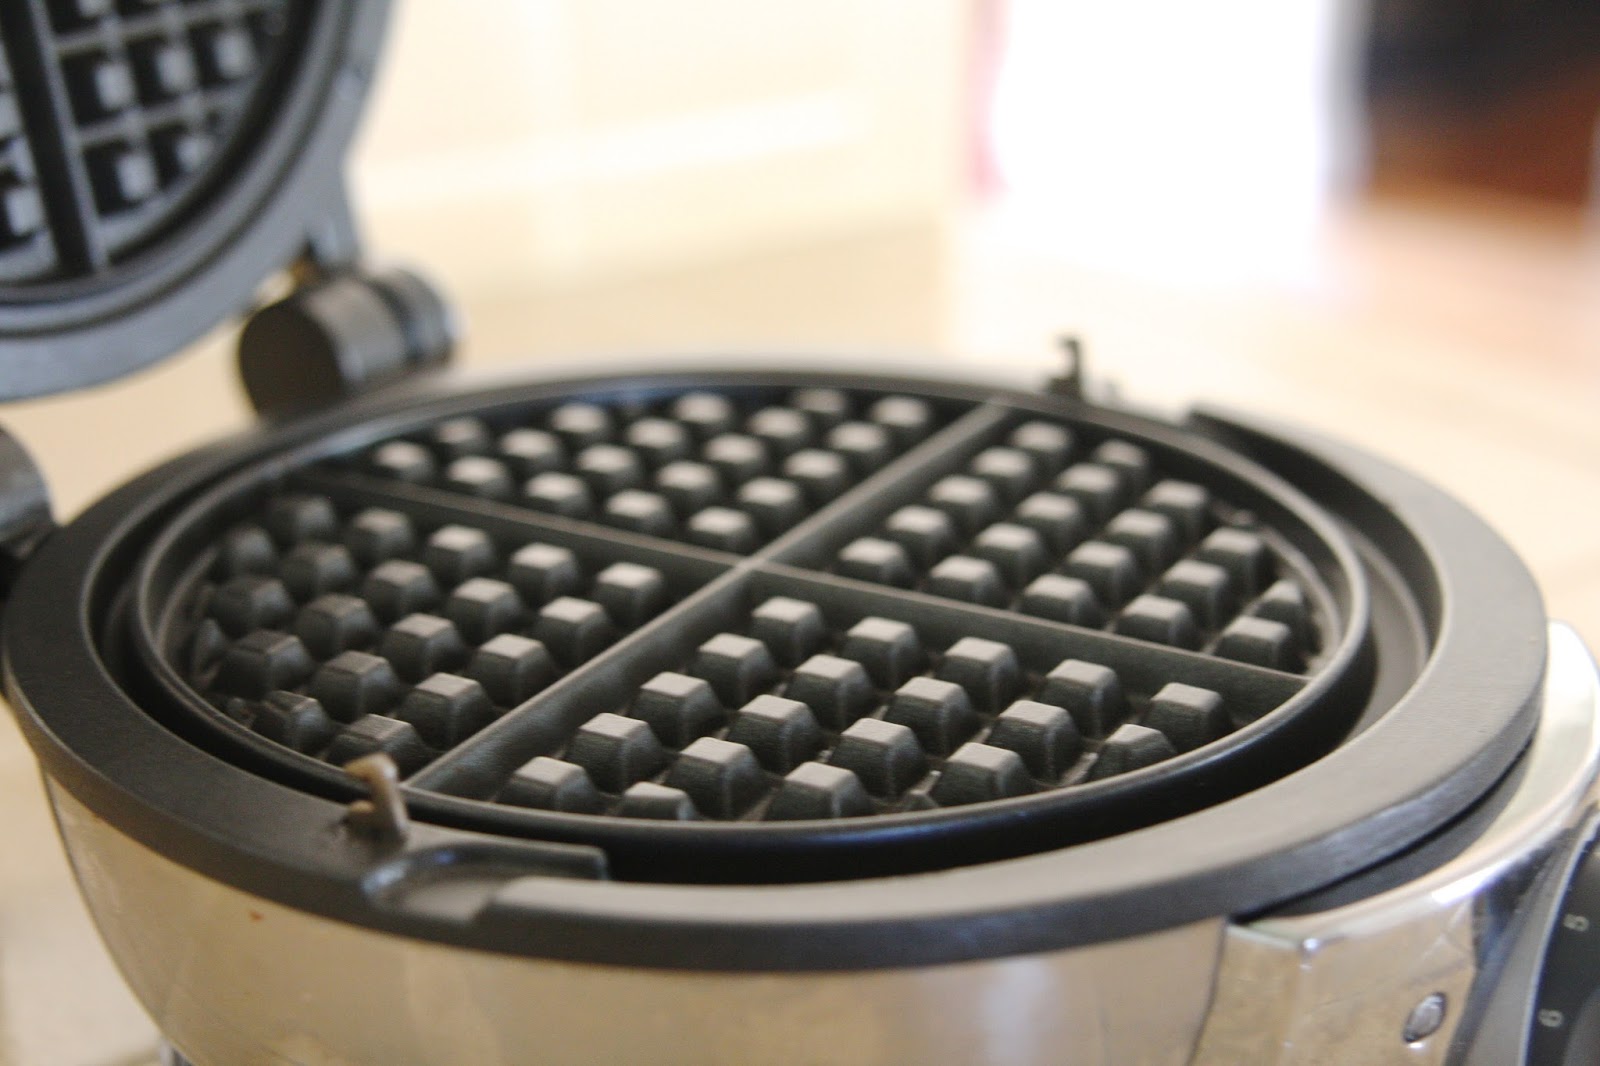 How To Clean a Waffle Iron with Non-Removable Plates - Simply Organized